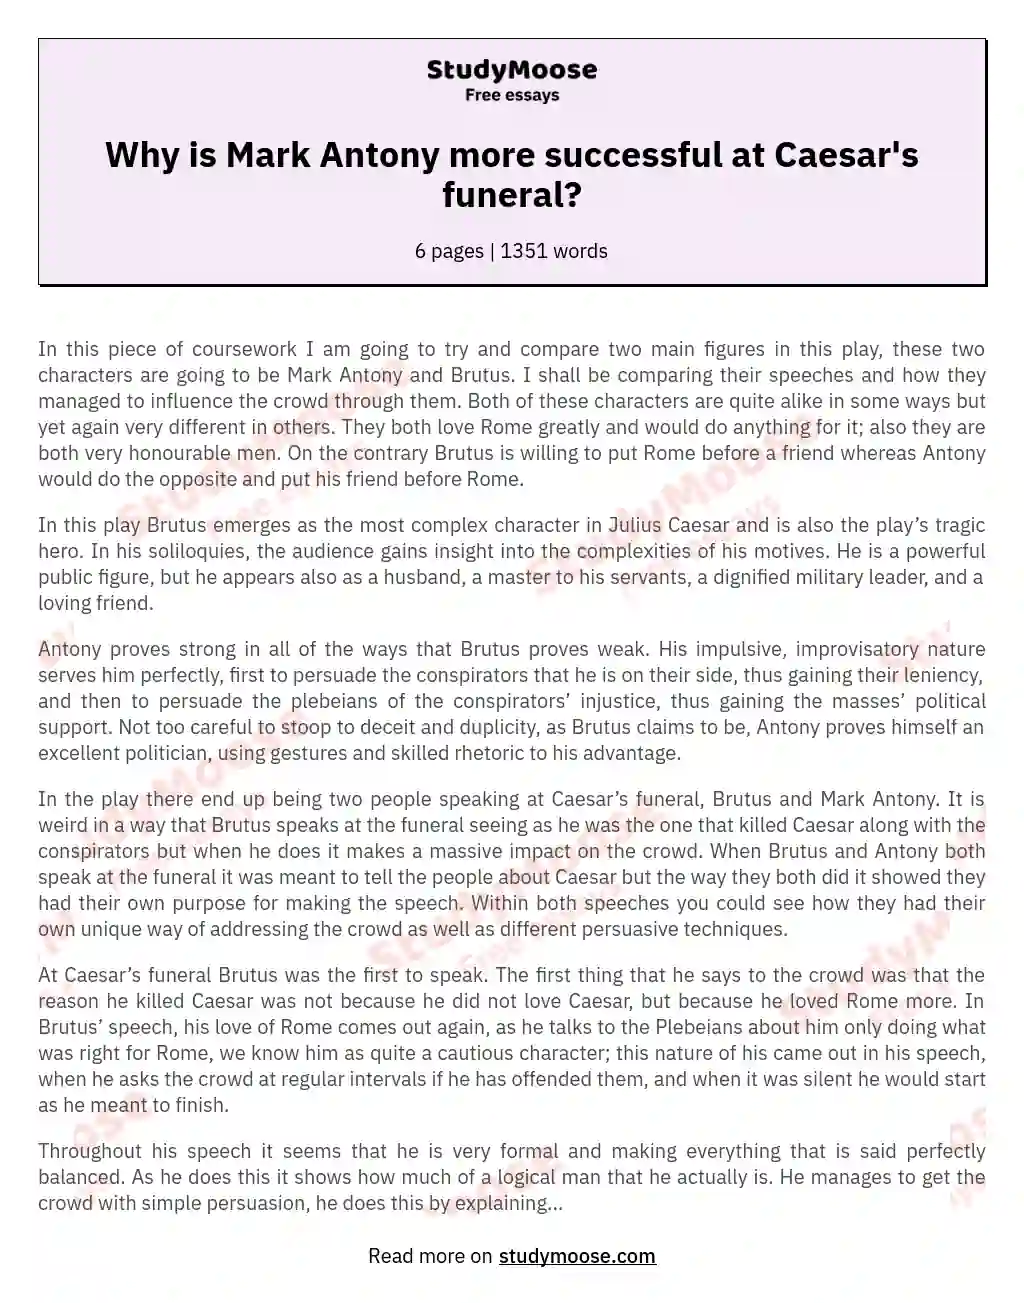 Why is Mark Antony more successful than Brutus in winning over the crowd at Caesar’s funeral?